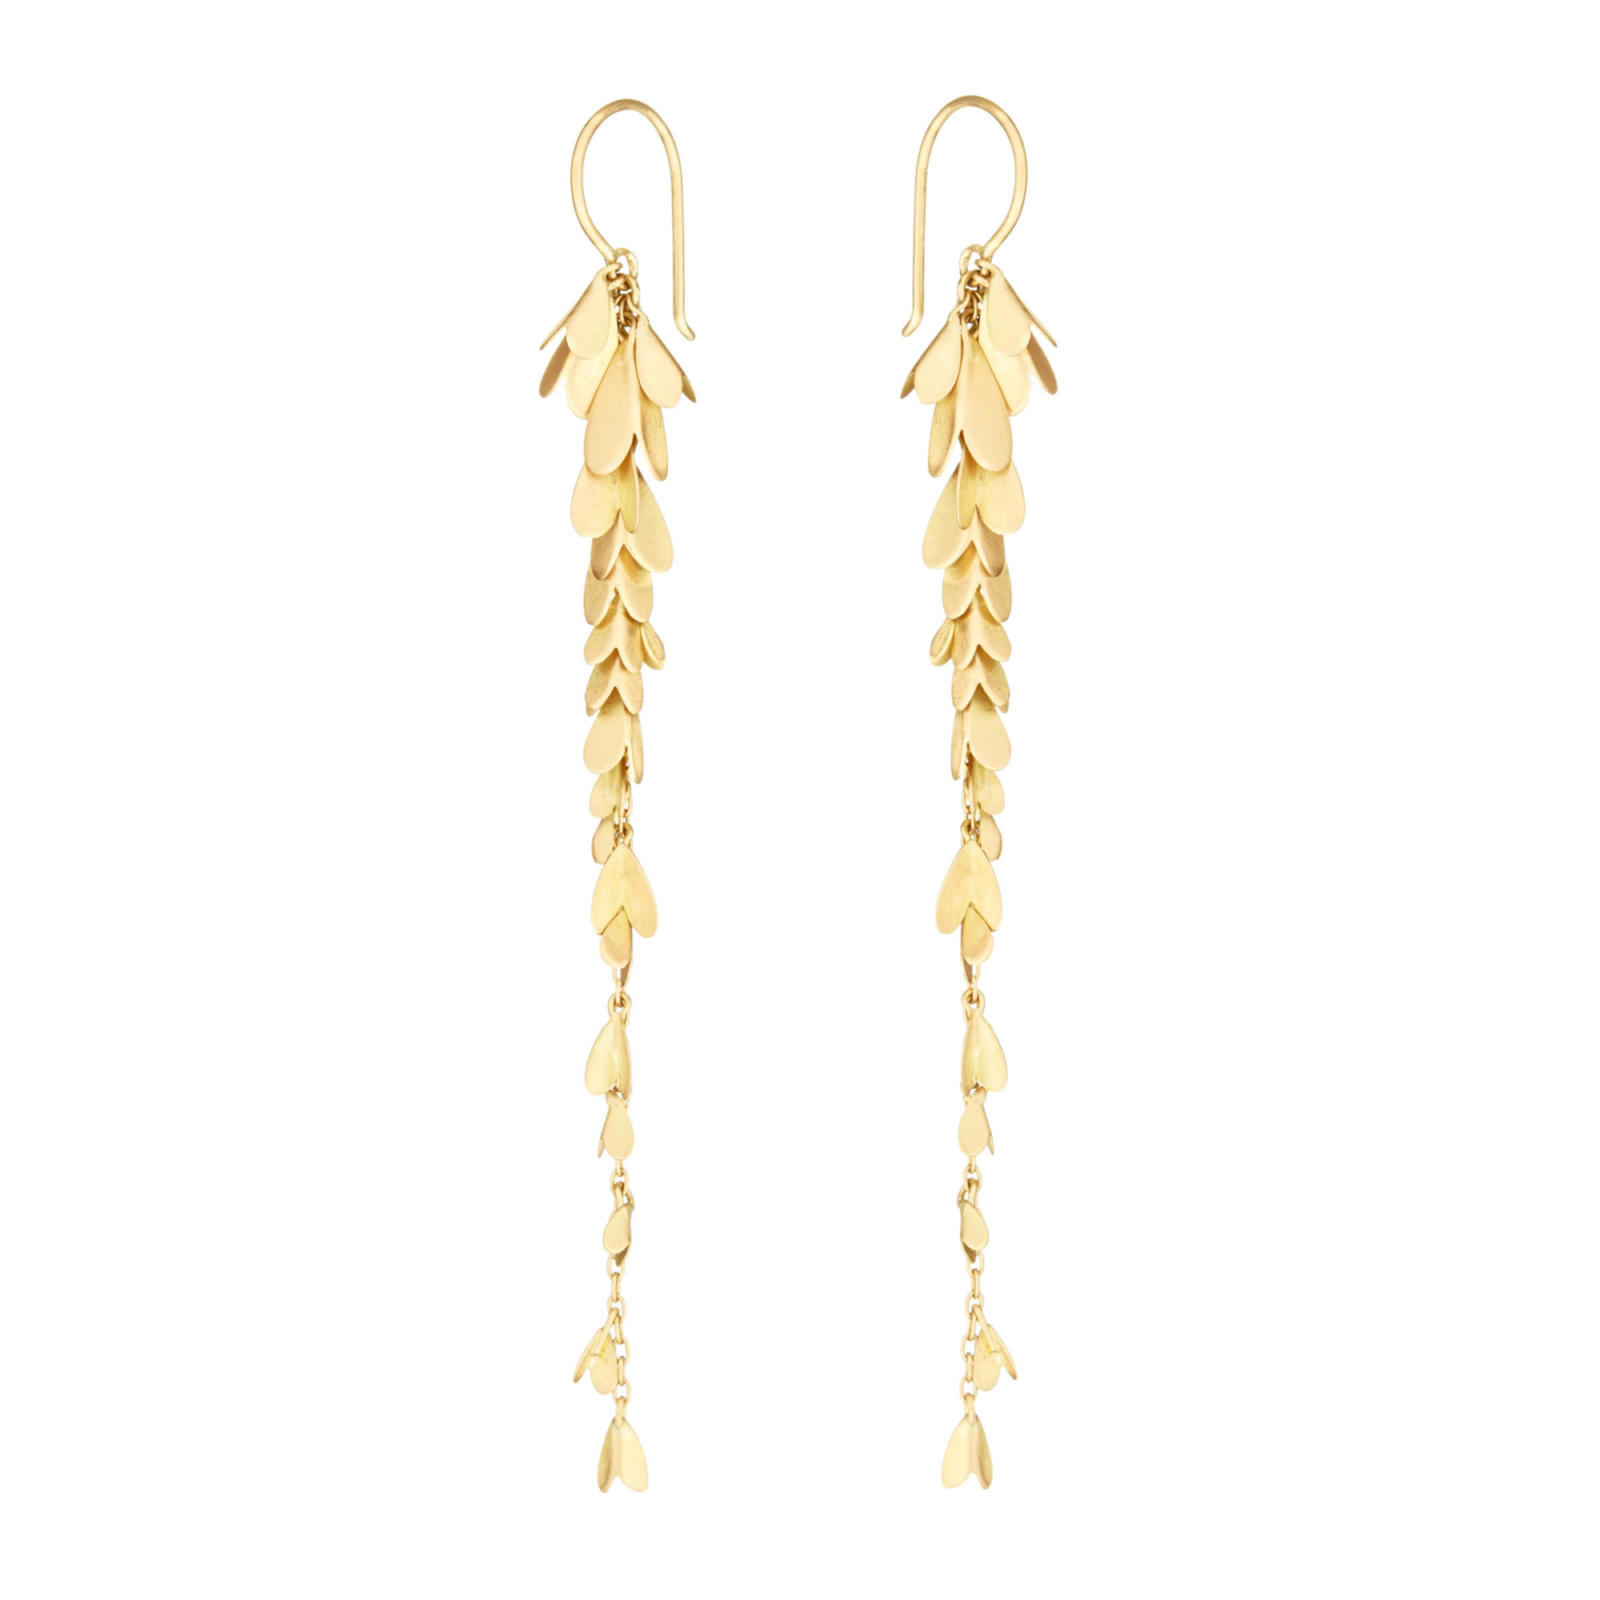 Sia Taylor ME6 Y Yellow Gold Earrings S